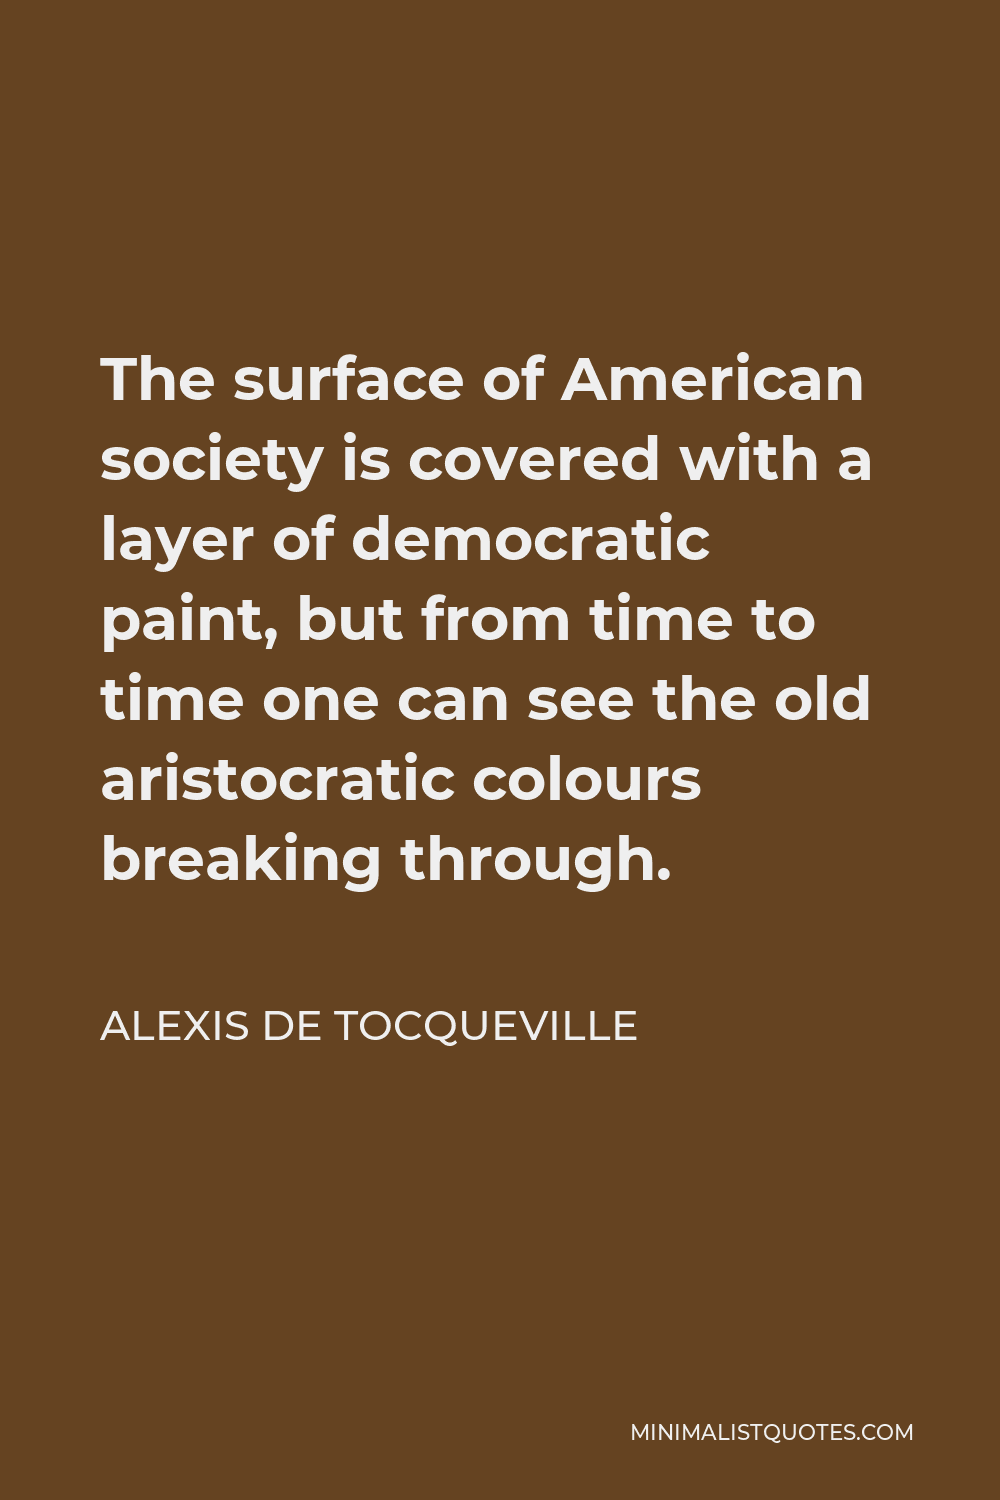 Alexis de Tocqueville Quote - The surface of American society is covered with a layer of democratic paint, but from time to time one can see the old aristocratic colours breaking through.